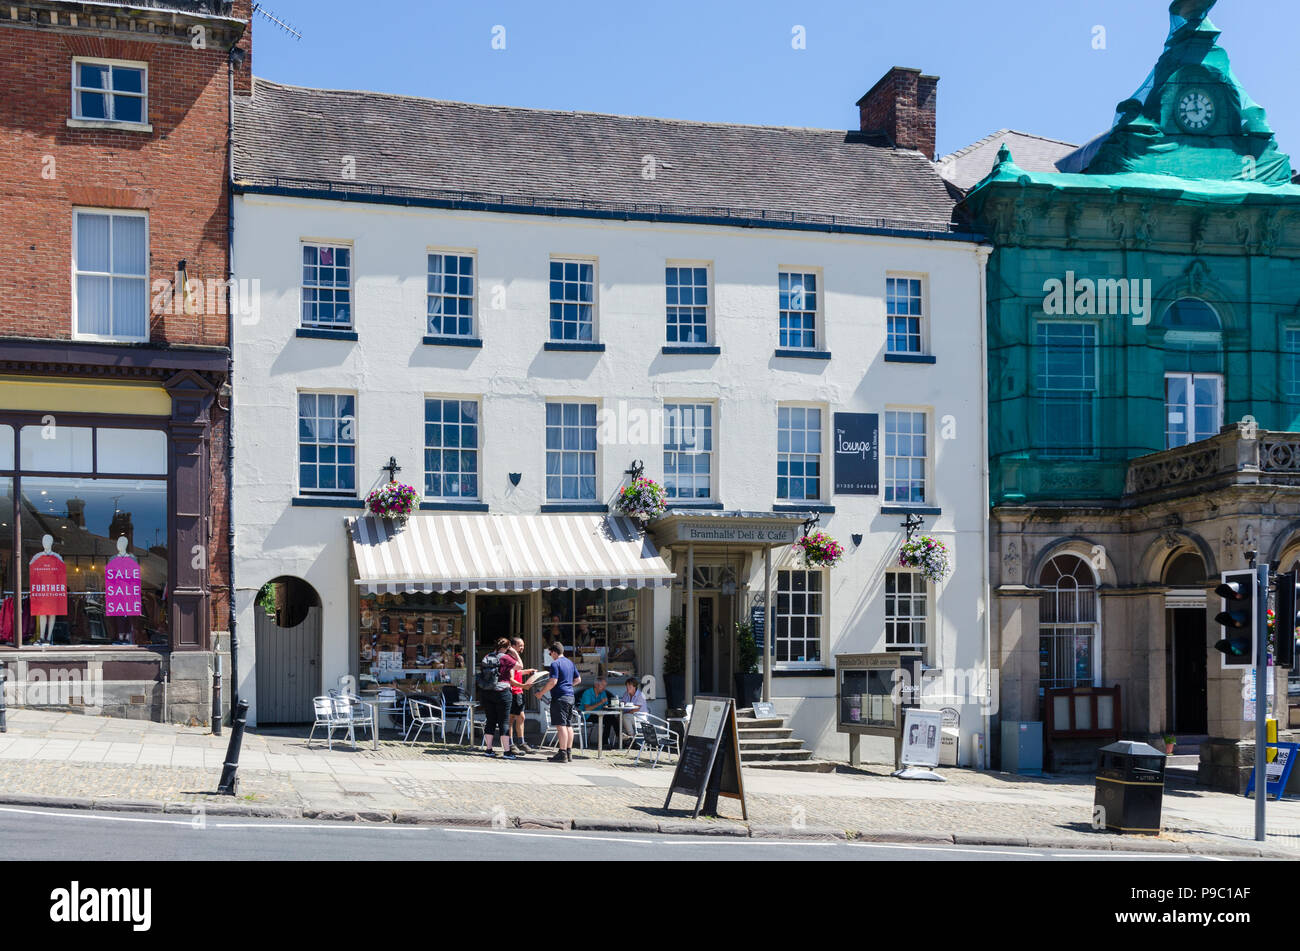 Bramhalls Deli and Cafe in Market Place, Ashbourne, Derbyshire Stock Photo